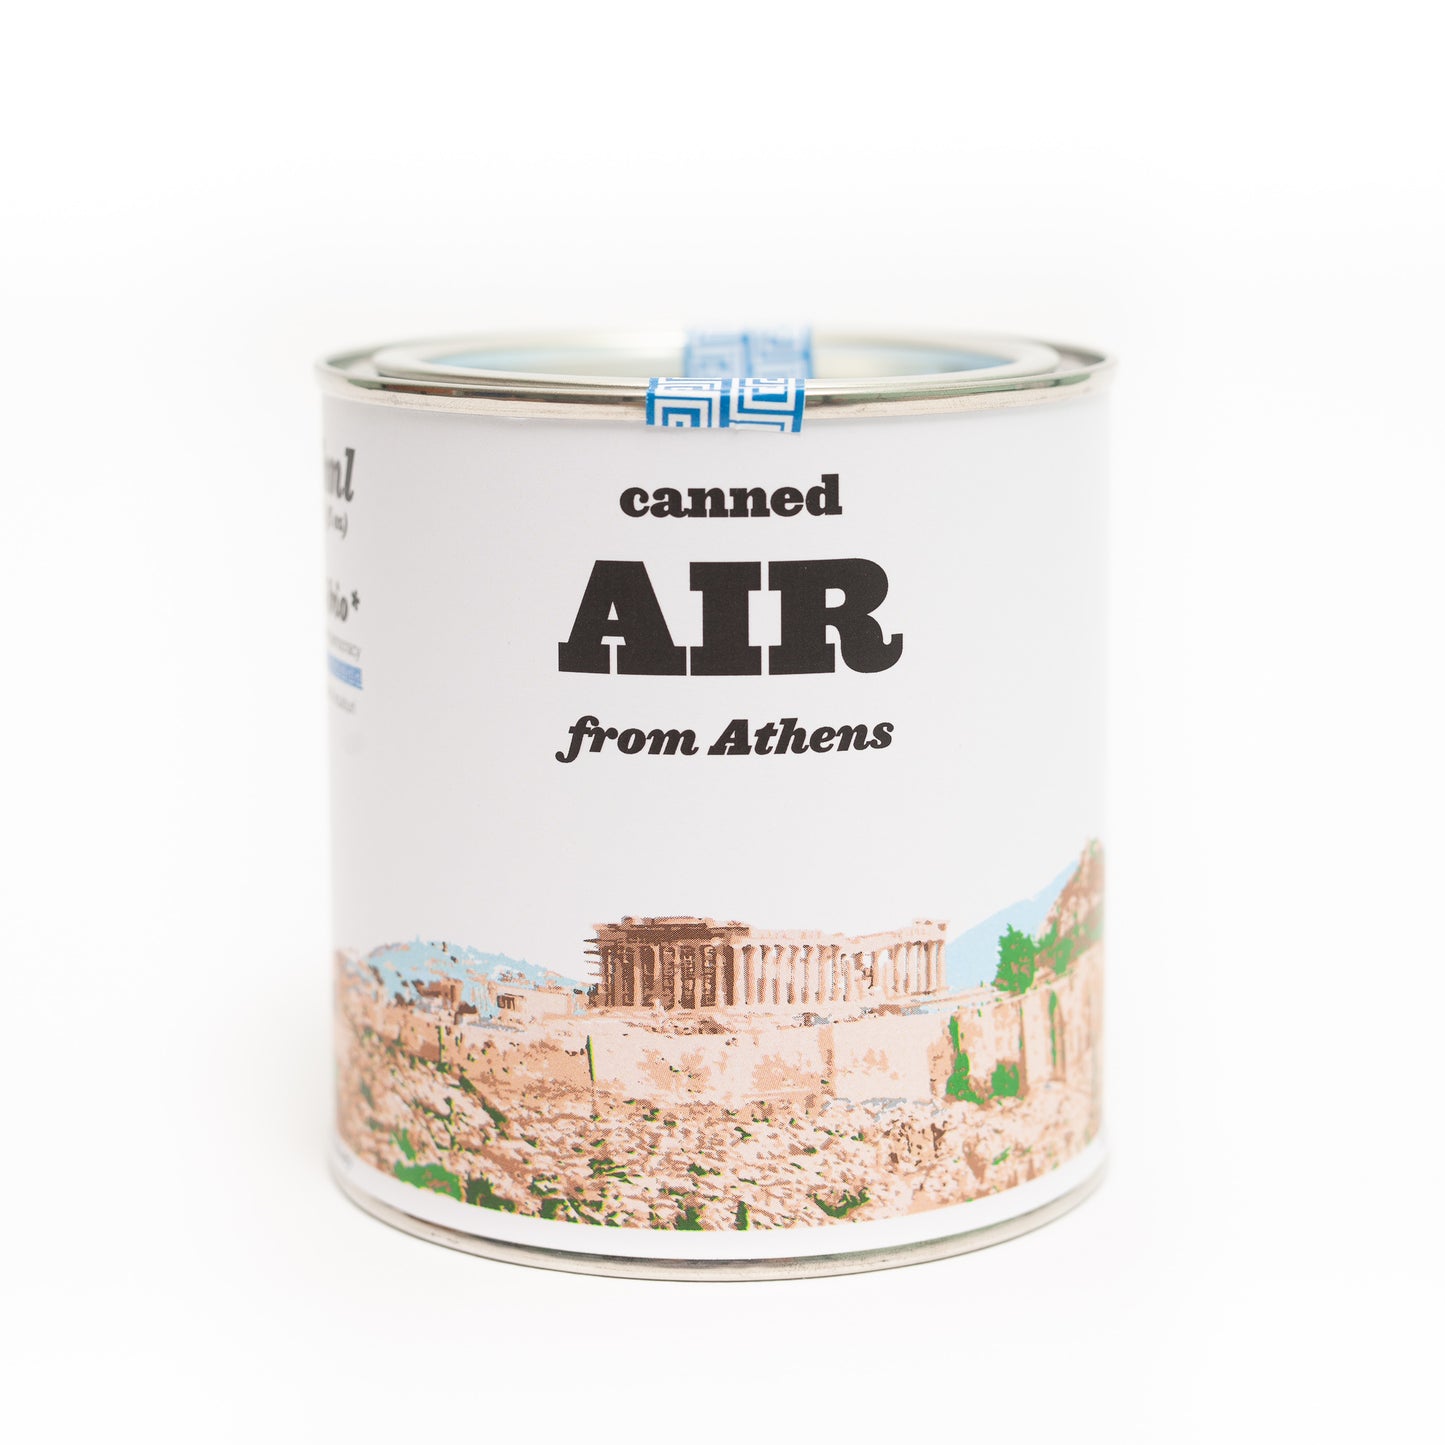 Canned Air from Athens